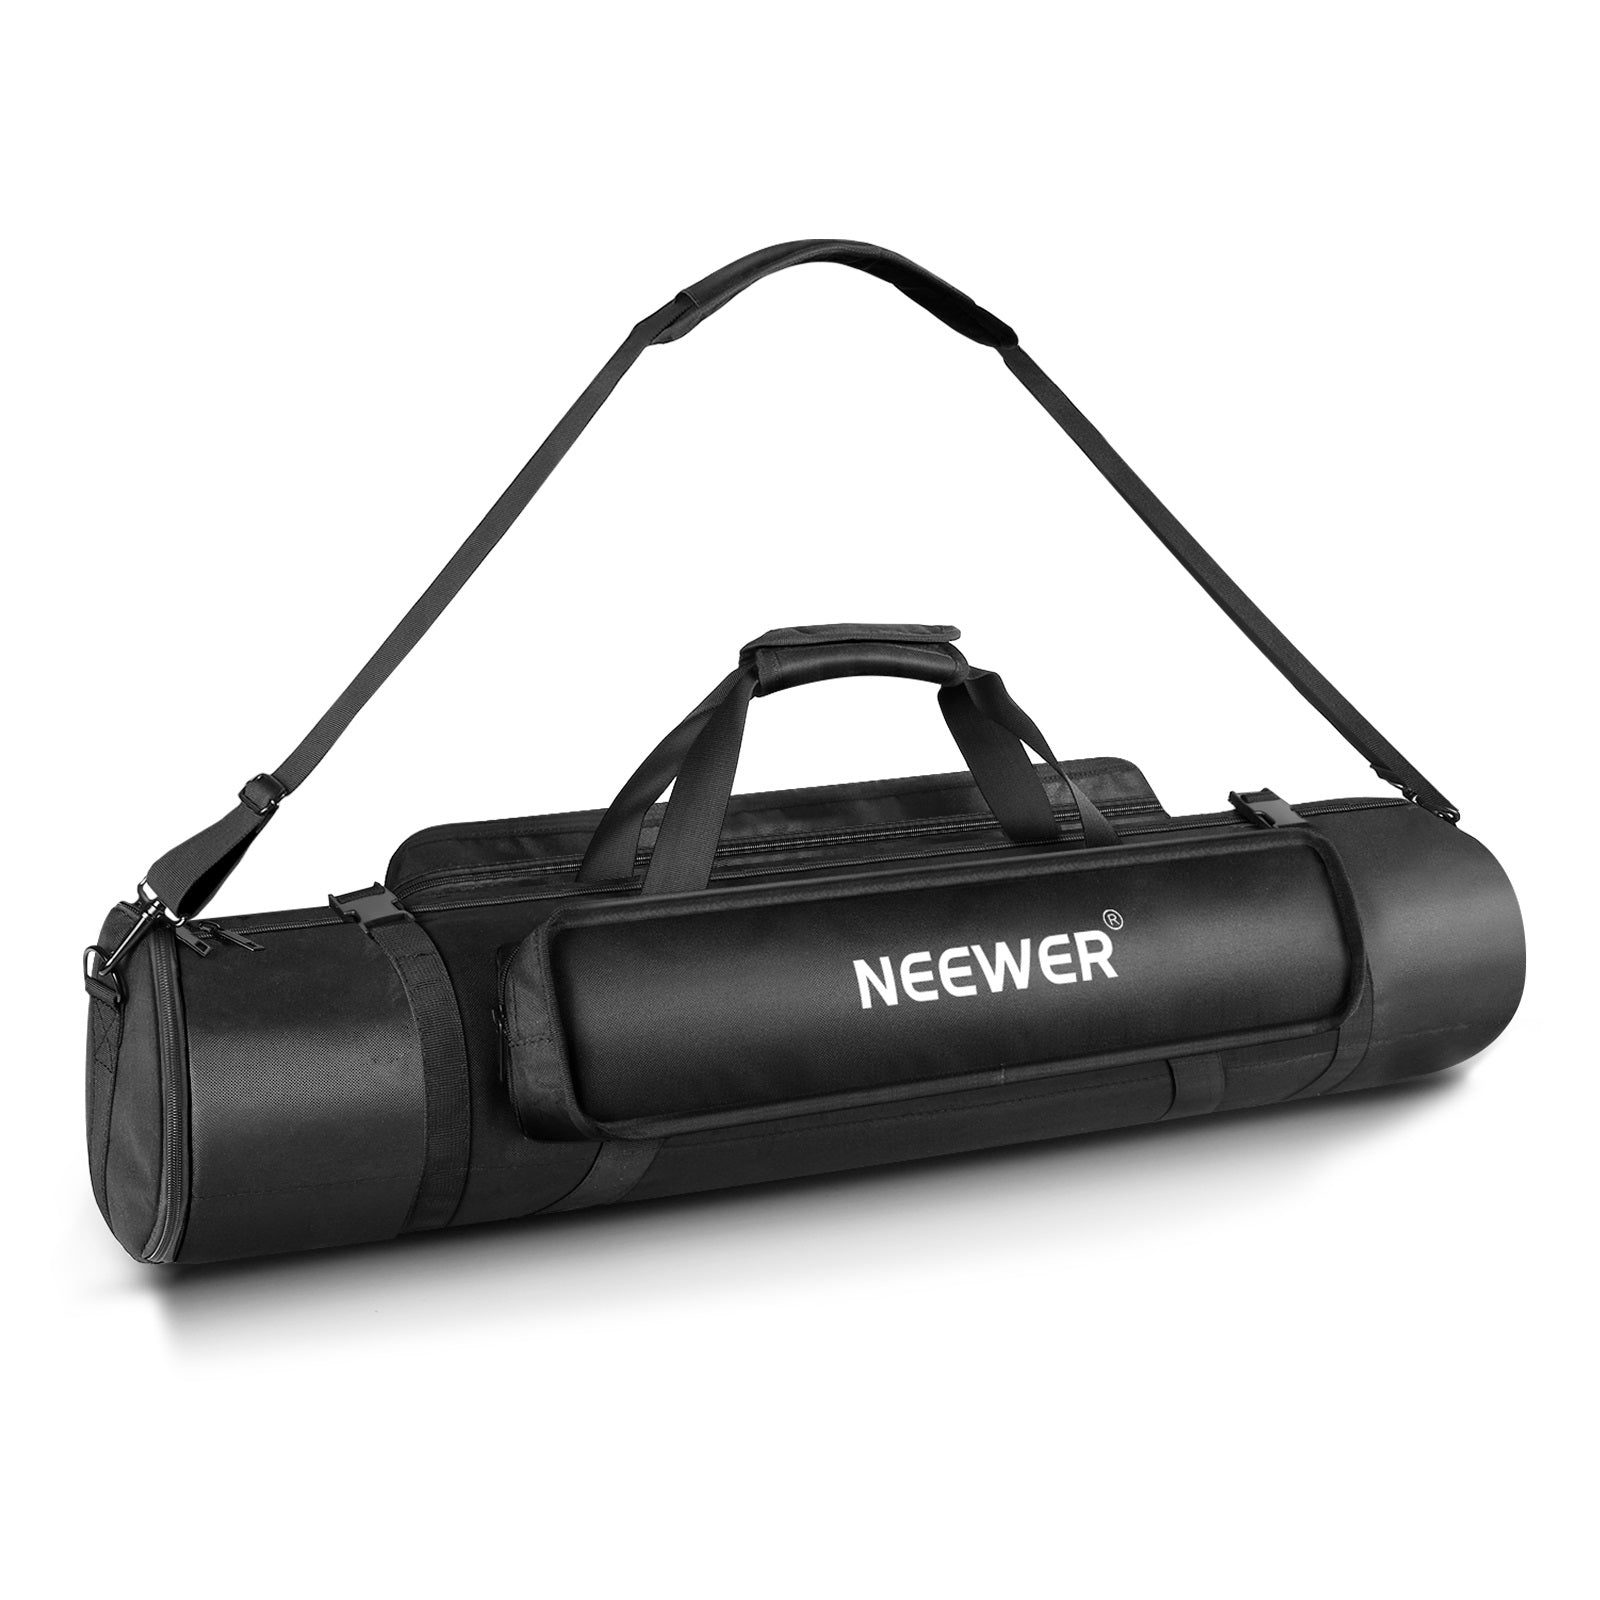 Neewer 2-in-1 Rolling Camera Backpack 66600259 B&H Photo Video